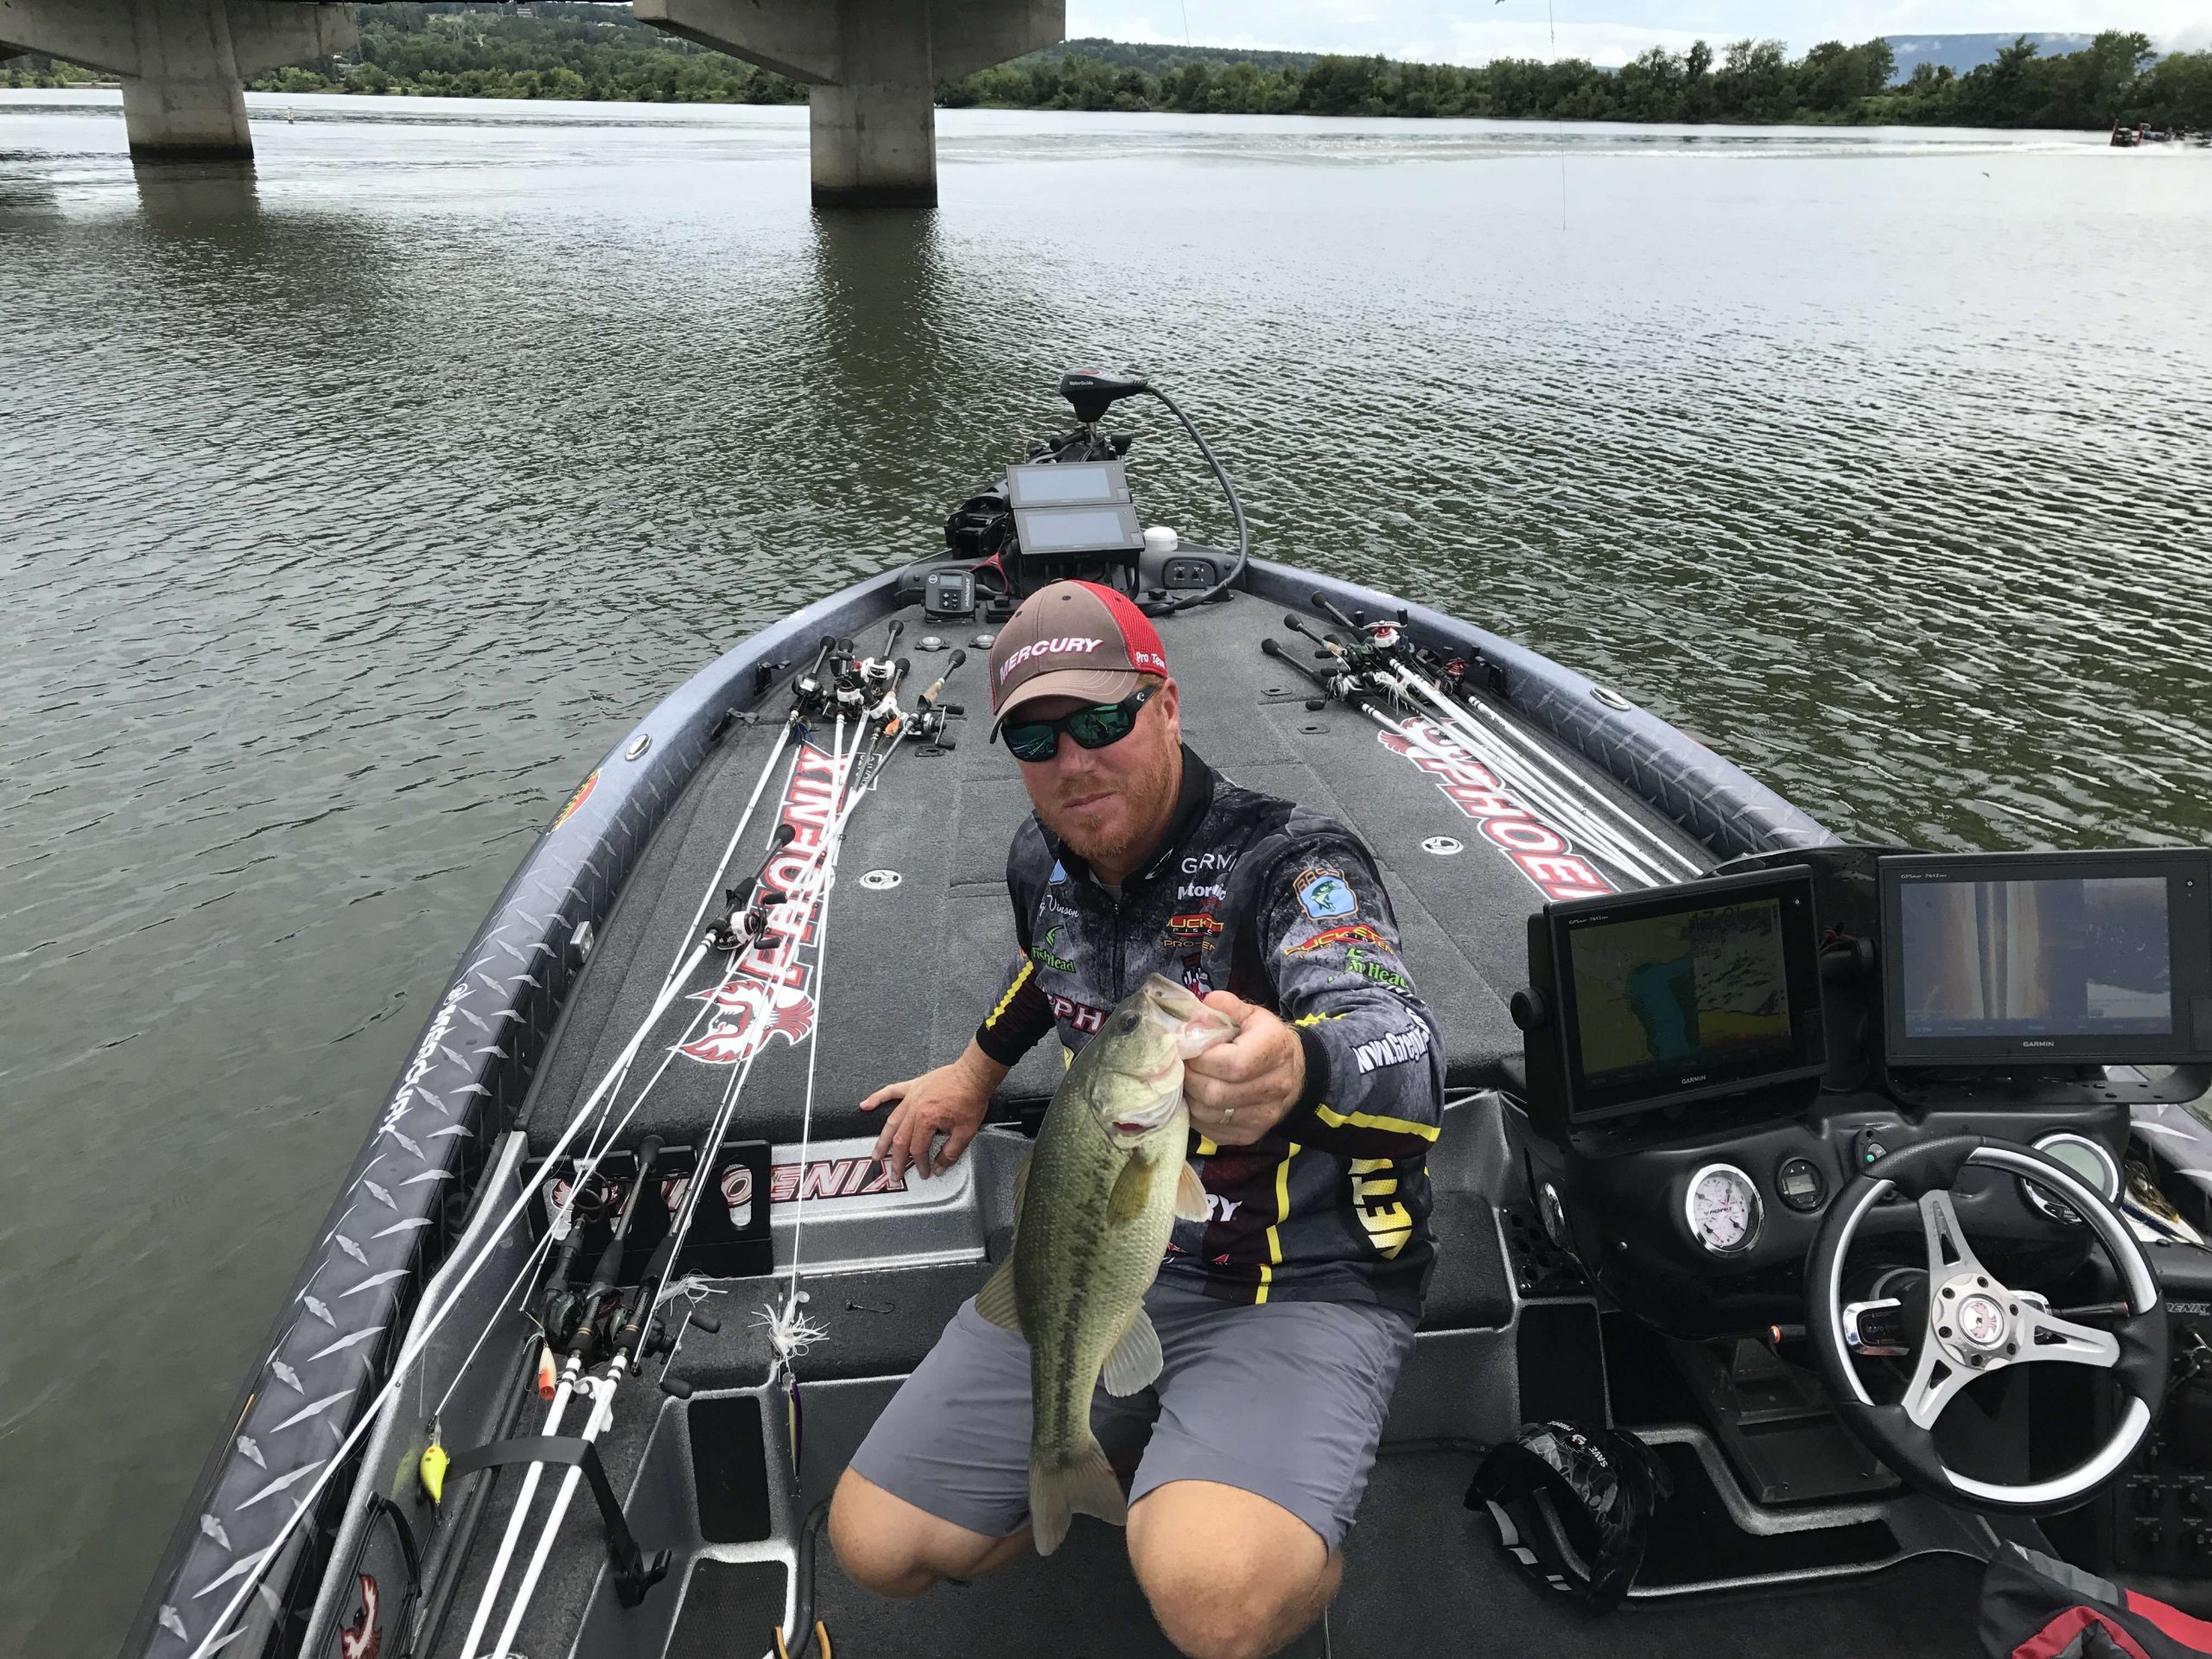 Greg Vinson still charging. With this fish he's now culling.